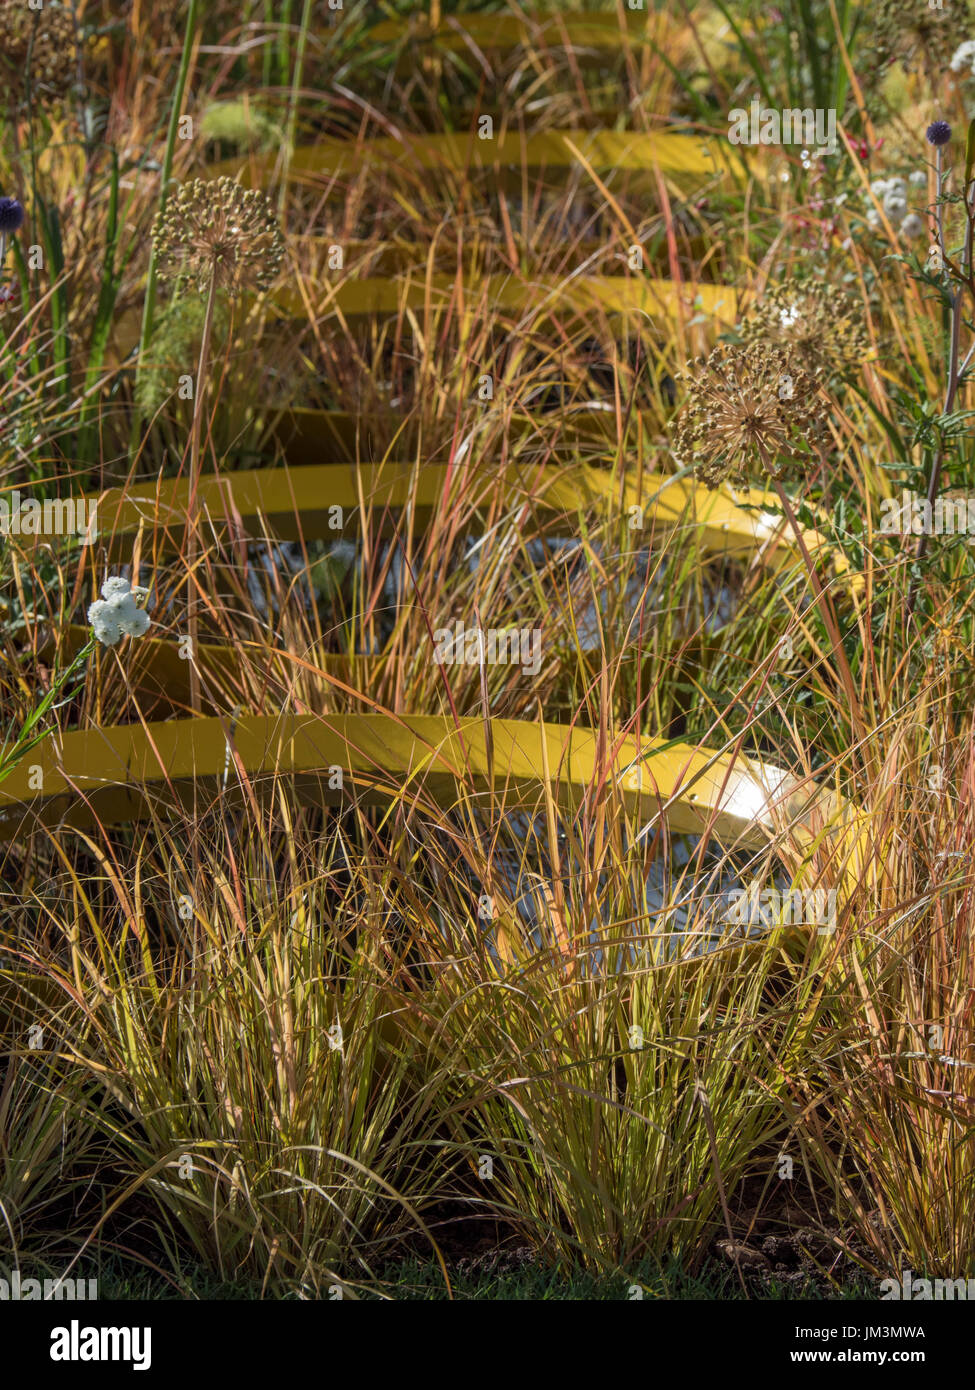 Kinetica show garden.  Gold water pans planted in grass   Designer John Warland’s. Stock Photo